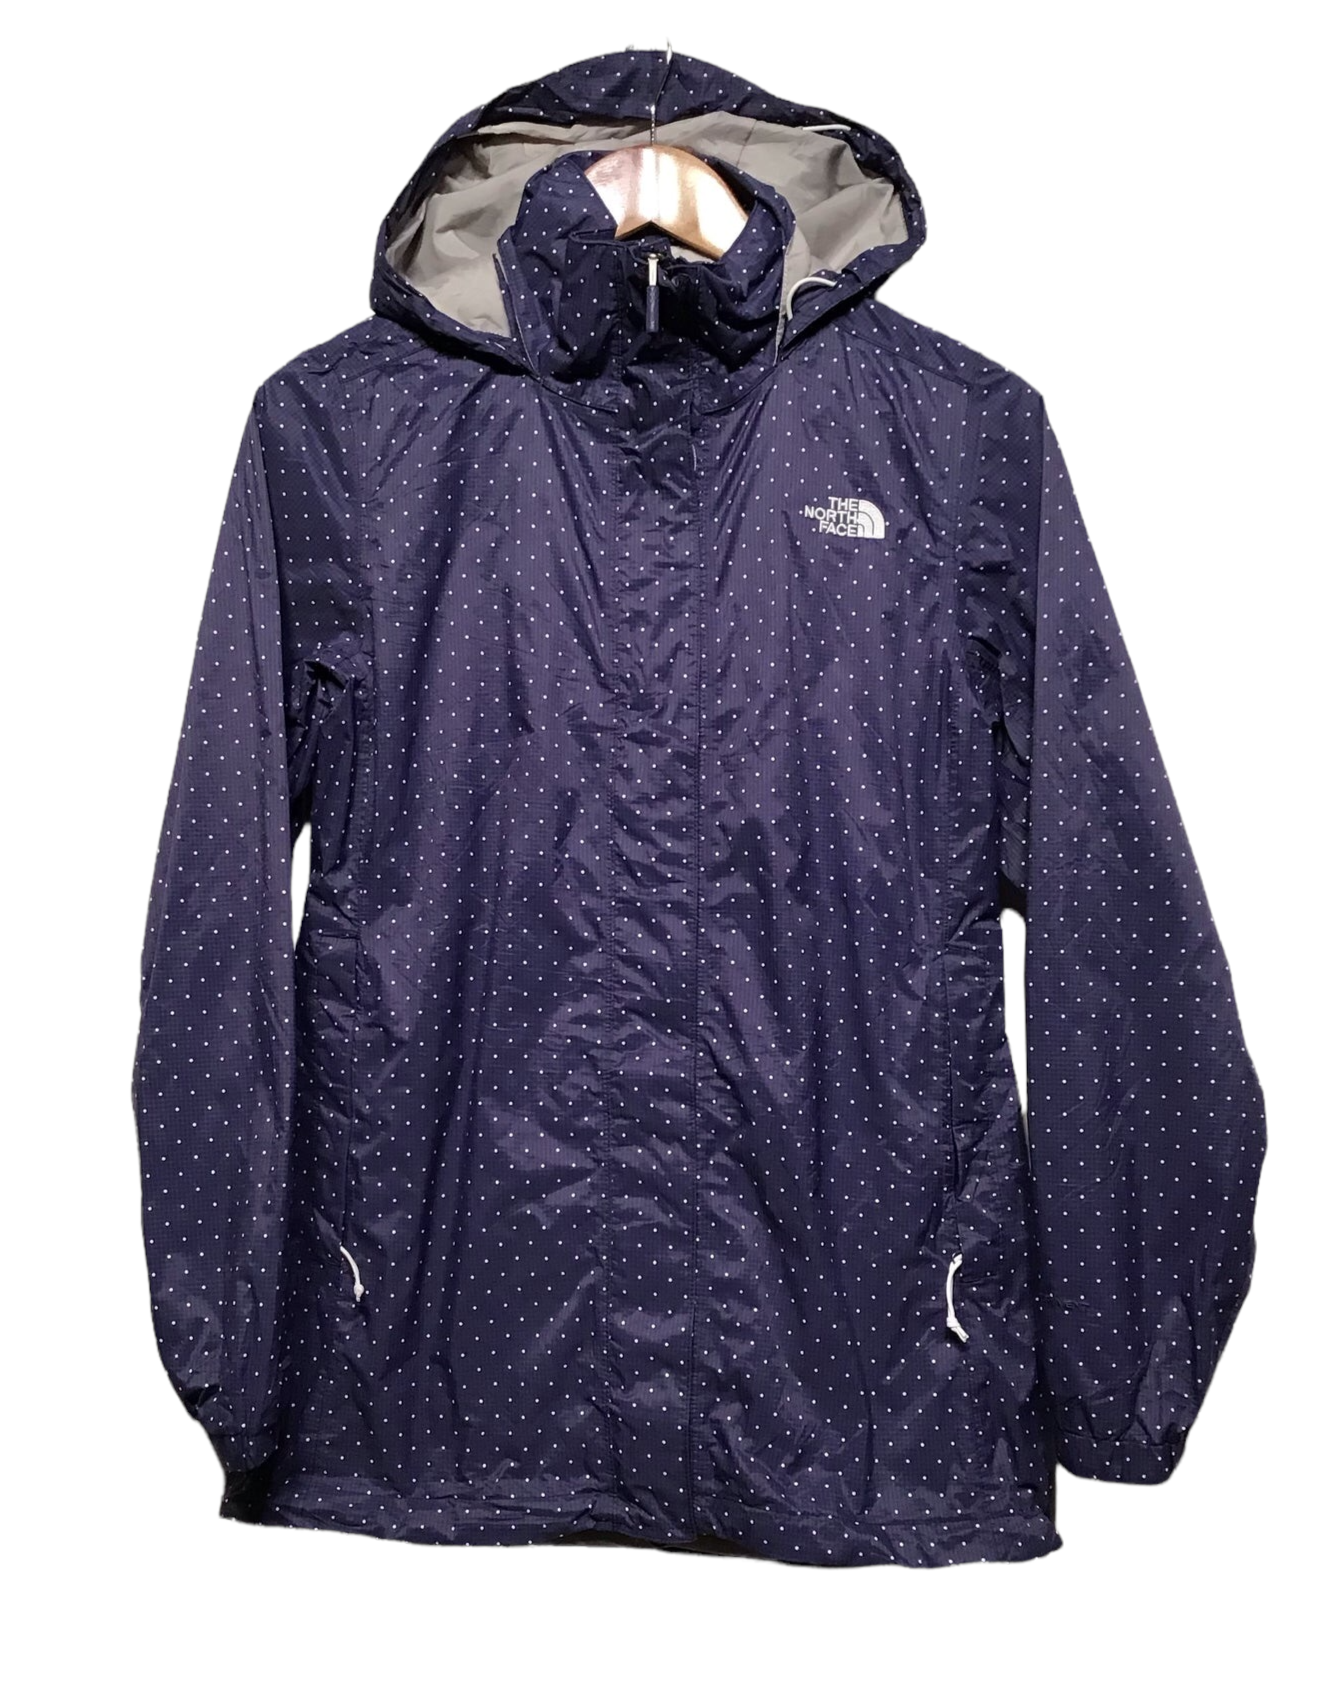 The North Face Waterproof Jacket (Women’s Size S)